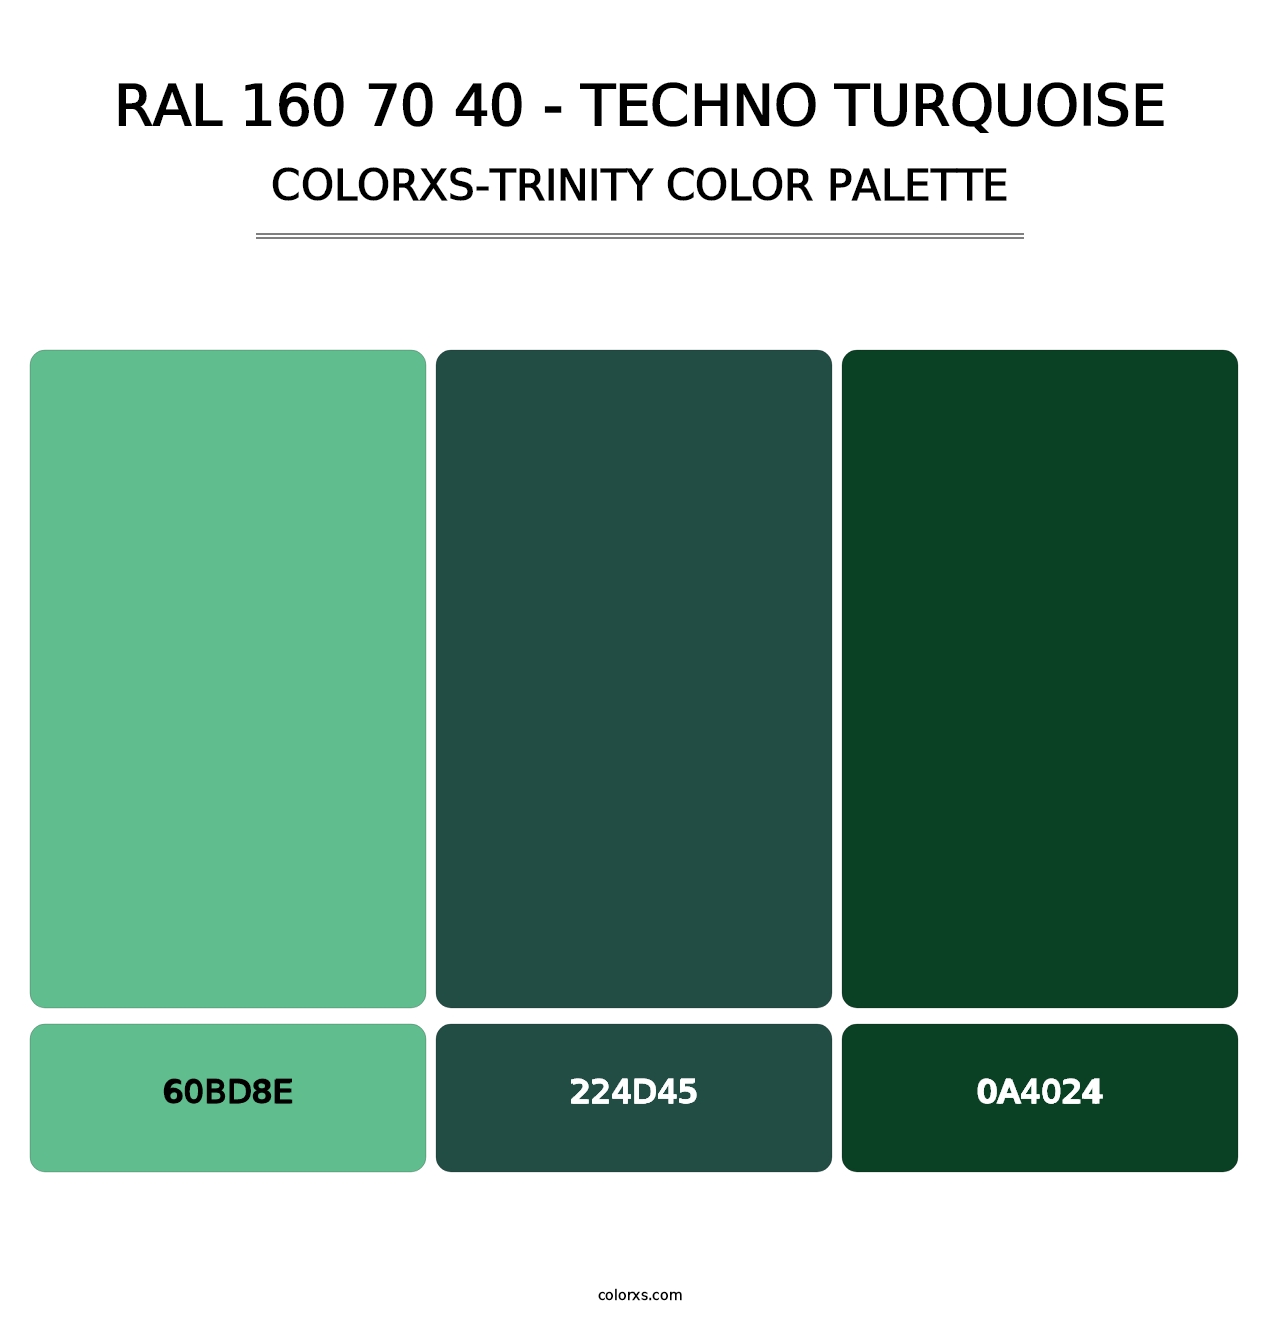 RAL 160 70 40 - Techno Turquoise - Colorxs Trinity Palette